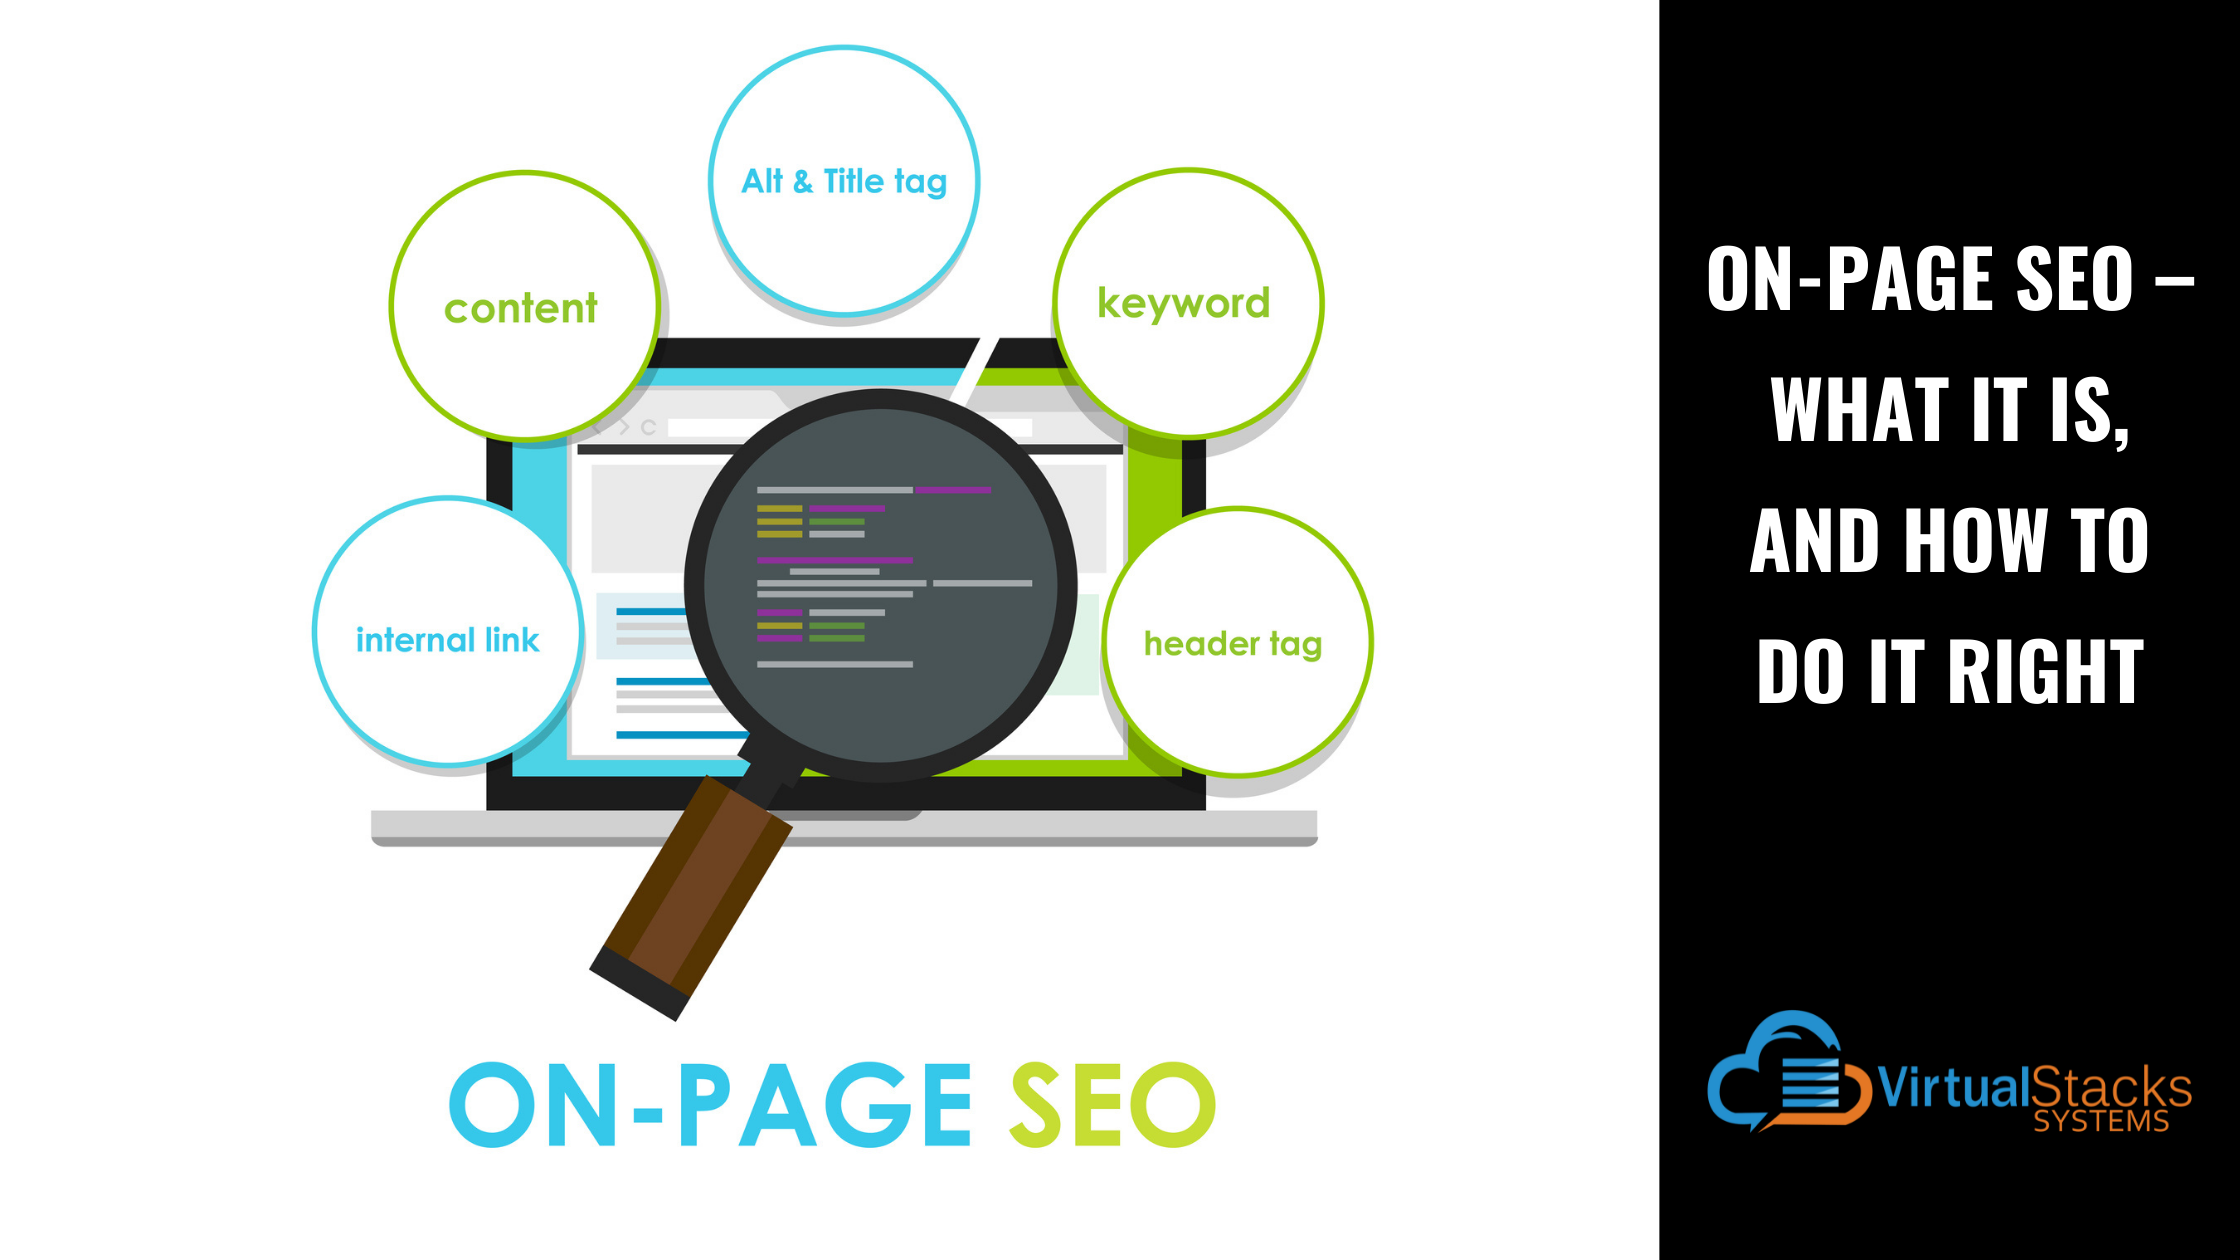 On-Page SEO – What It Is, And How To Do It Right